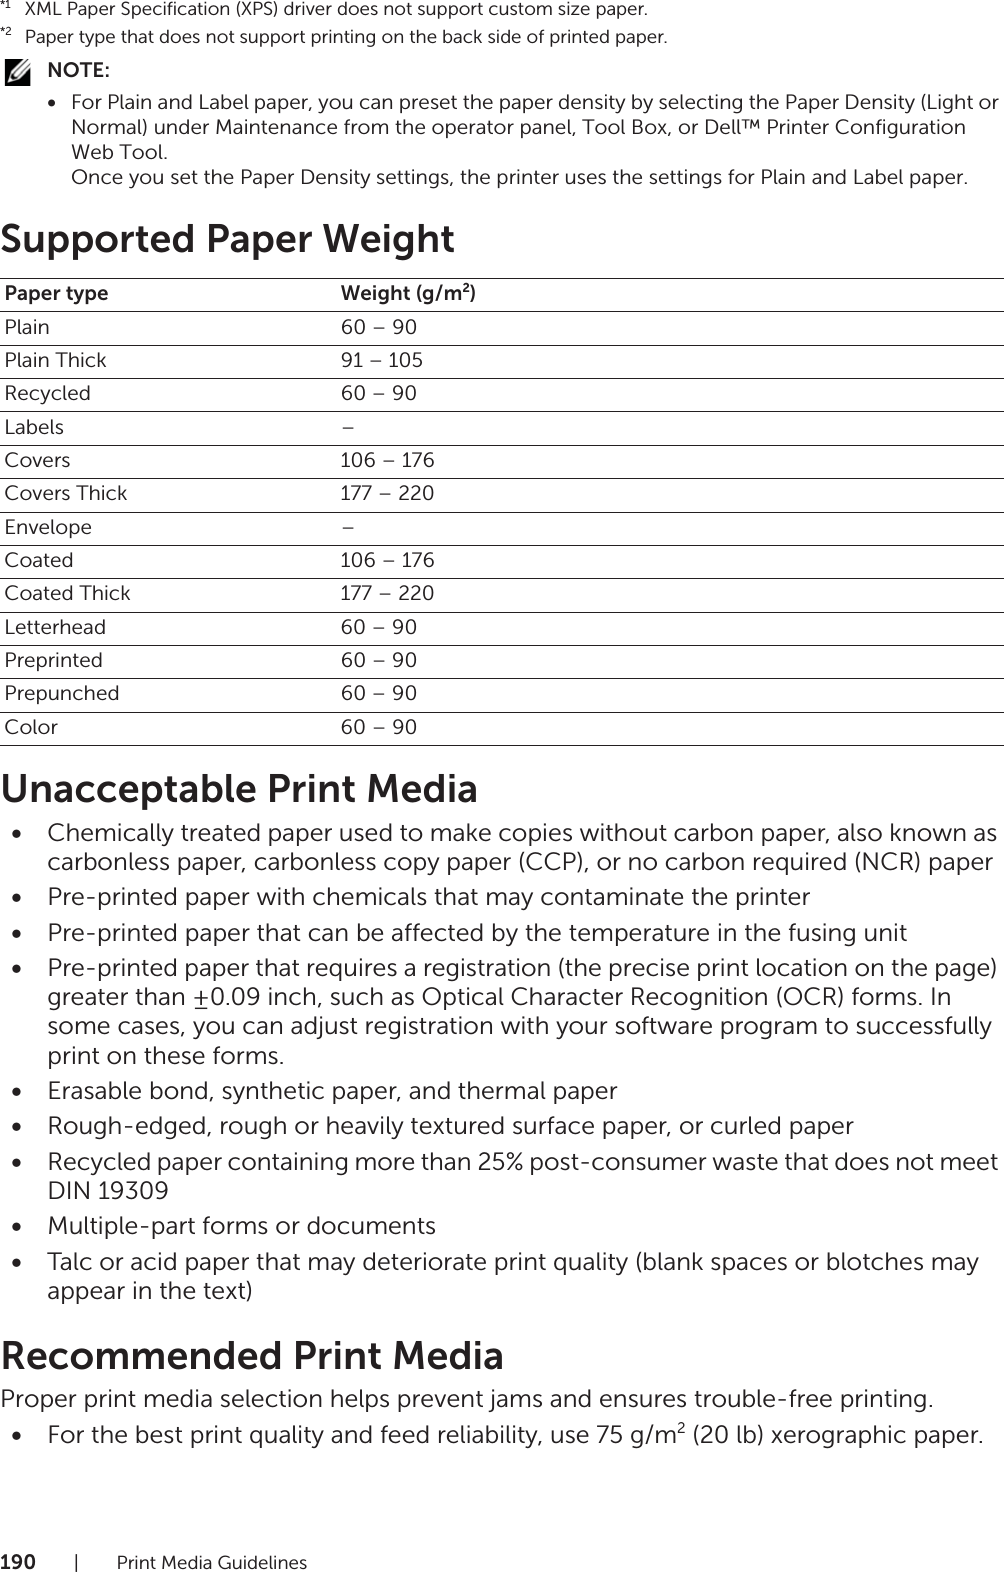 190| Print Media Guidelines*1XML Paper Specification (XPS) driver does not support custom size paper.*2Paper type that does not support printing on the back side of printed paper.NOTE:•For Plain and Label paper, you can preset the paper density by selecting the Paper Density (Light or Normal) under Maintenance from the operator panel, Tool Box, or Dell™ Printer Configuration Web Tool.Once you set the Paper Density settings, the printer uses the settings for Plain and Label paper.Supported Paper WeightUnacceptable Print Media•Chemically treated paper used to make copies without carbon paper, also known as carbonless paper, carbonless copy paper (CCP), or no carbon required (NCR) paper•Pre-printed paper with chemicals that may contaminate the printer•Pre-printed paper that can be affected by the temperature in the fusing unit•Pre-printed paper that requires a registration (the precise print location on the page) greater than ±0.09 inch, such as Optical Character Recognition (OCR) forms. In some cases, you can adjust registration with your software program to successfully print on these forms.•Erasable bond, synthetic paper, and thermal paper•Rough-edged, rough or heavily textured surface paper, or curled paper•Recycled paper containing more than 25% post-consumer waste that does not meet DIN 19309•Multiple-part forms or documents•Talc or acid paper that may deteriorate print quality (blank spaces or blotches may appear in the text)Recommended Print MediaProper print media selection helps prevent jams and ensures trouble-free printing.•For the best print quality and feed reliability, use 75 g/m2 (20 lb) xerographic paper.Paper type Weight (g/m2)Plain 60 – 90Plain Thick 91 – 105Recycled 60 – 90Labels –Covers 106 – 176Covers Thick 177 – 220Envelope –Coated 106 – 176Coated Thick 177 – 220Letterhead 60 – 90Preprinted 60 – 90Prepunched 60 – 90Color 60 – 90